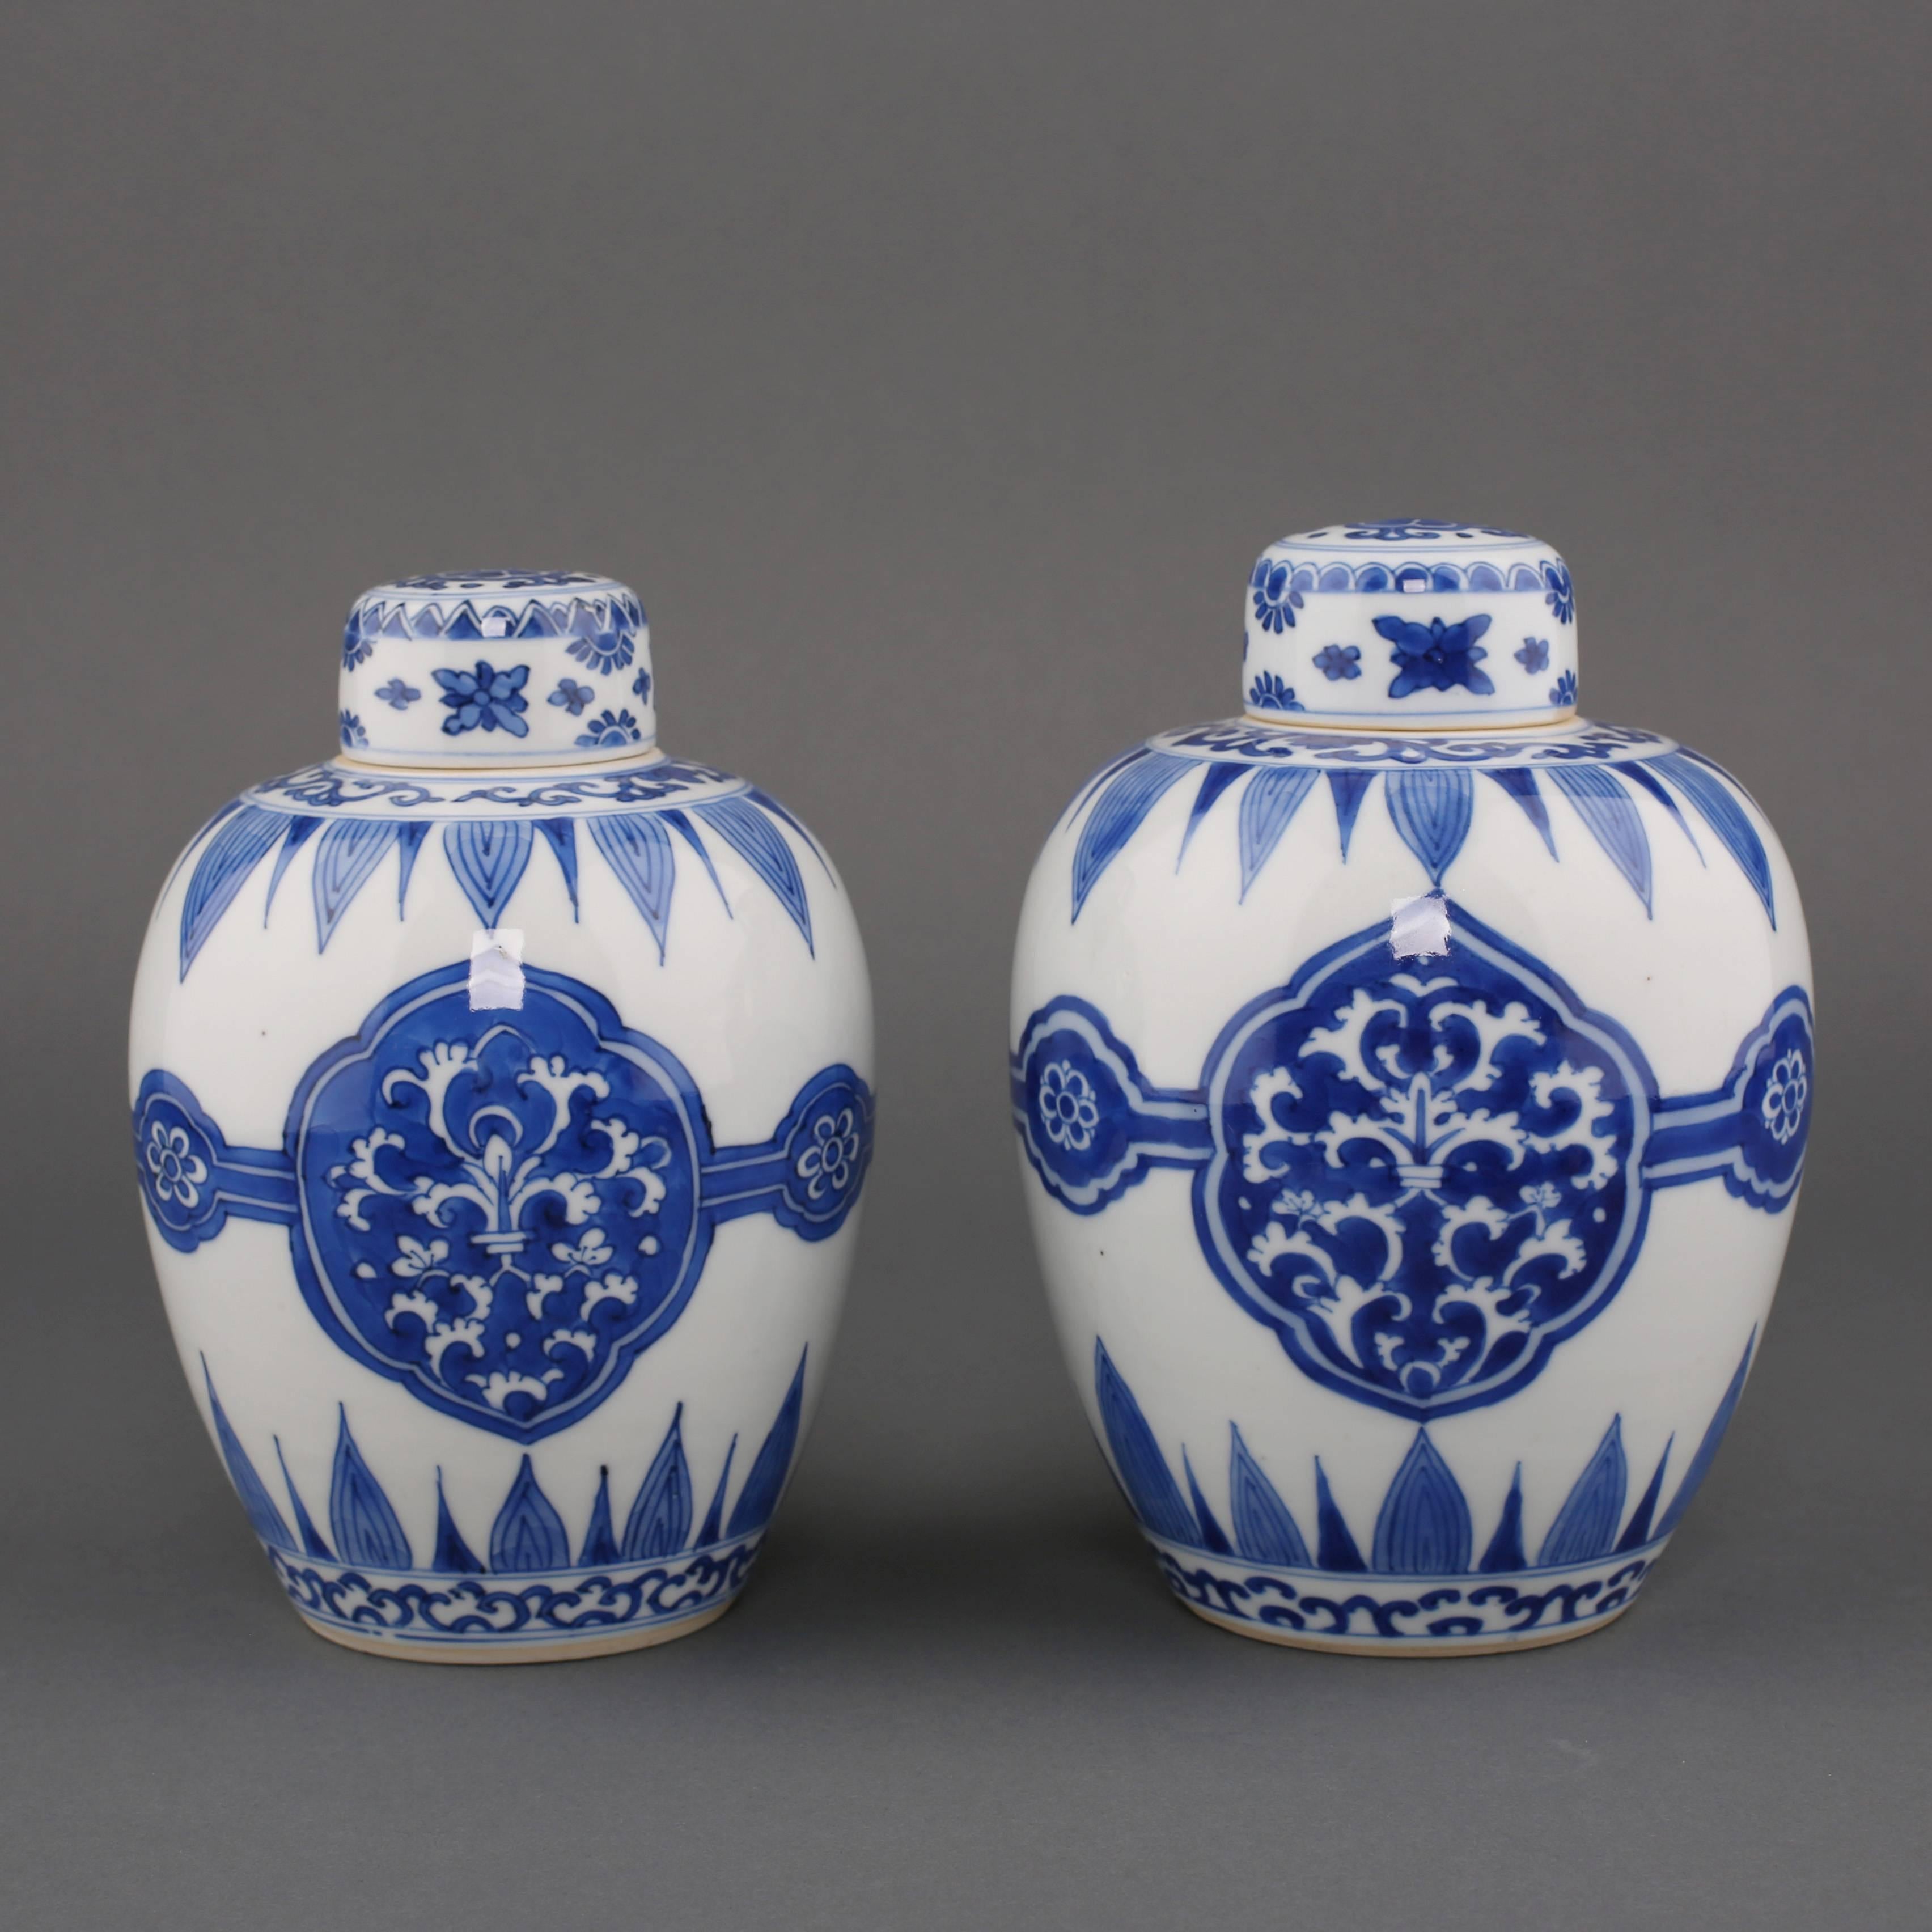 A pair of Chinese porcelain blue and white ovoid jars and covers, painted on either side with a stylized leaf motif enclosed in a panel, connected on either side by a small stylized flower head, all between alternating petal patterns and a further